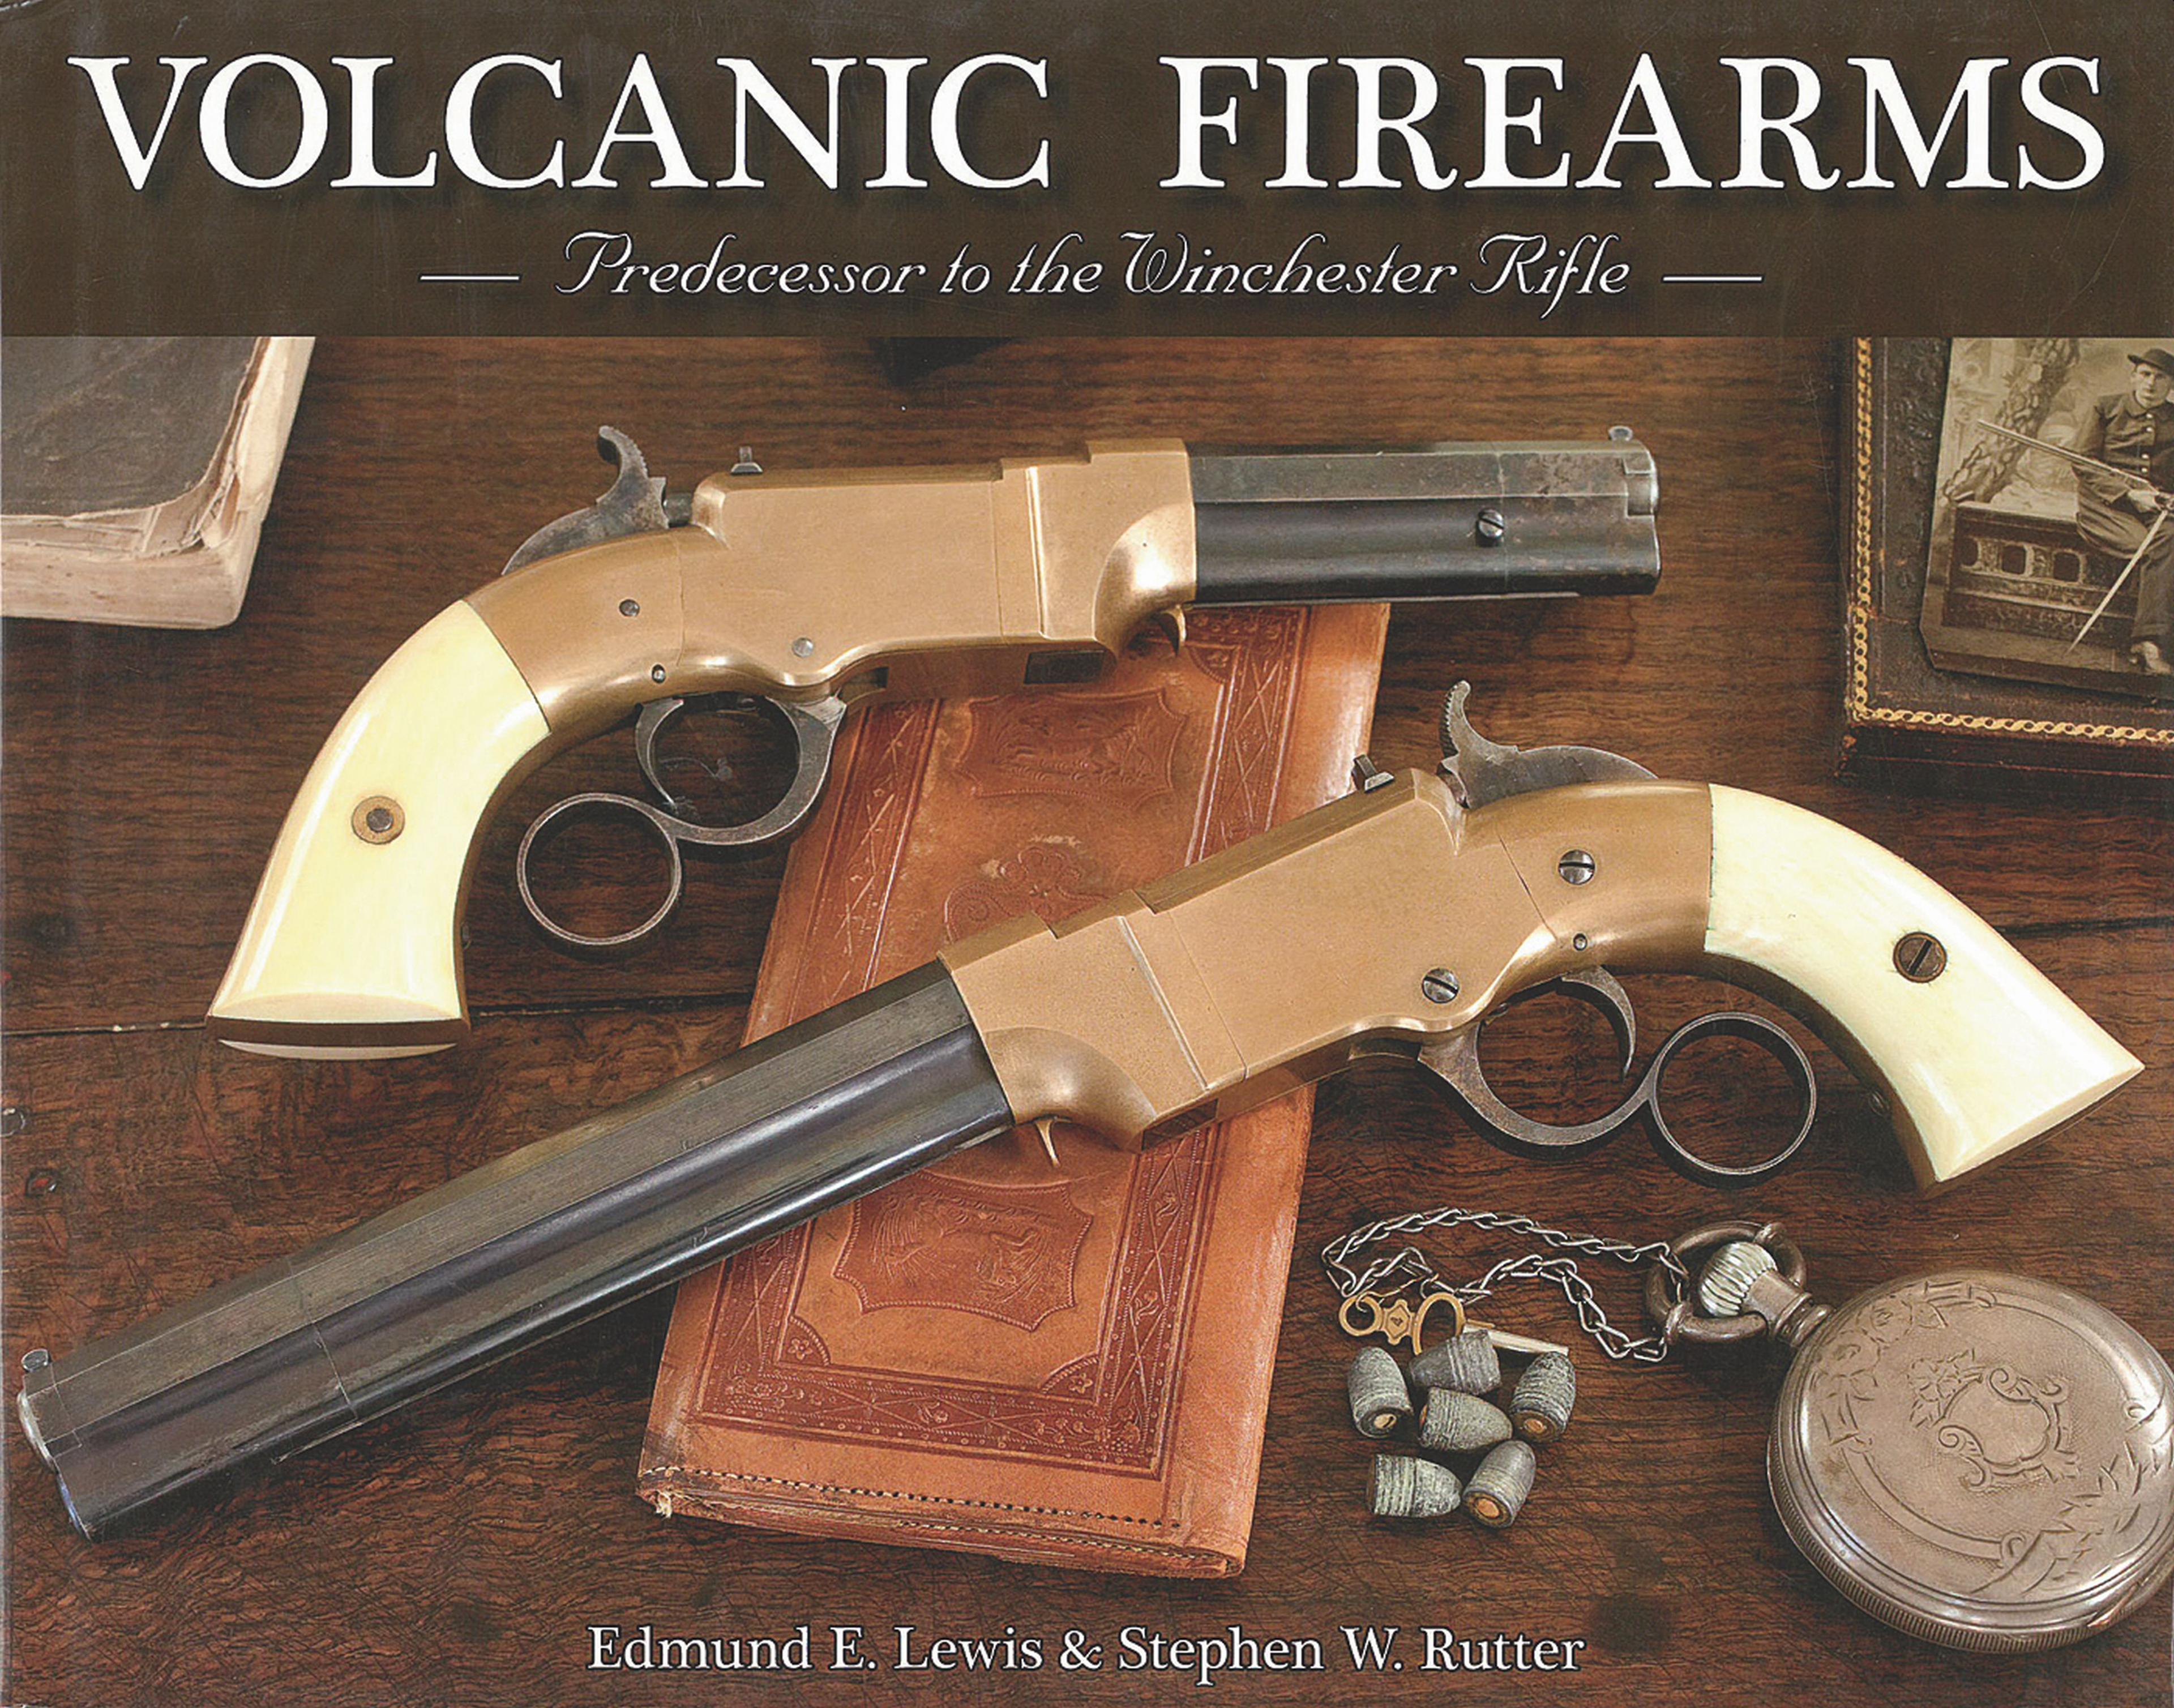 Engraved and Cased Volcanic Repeating Arms Company Navy Pistol